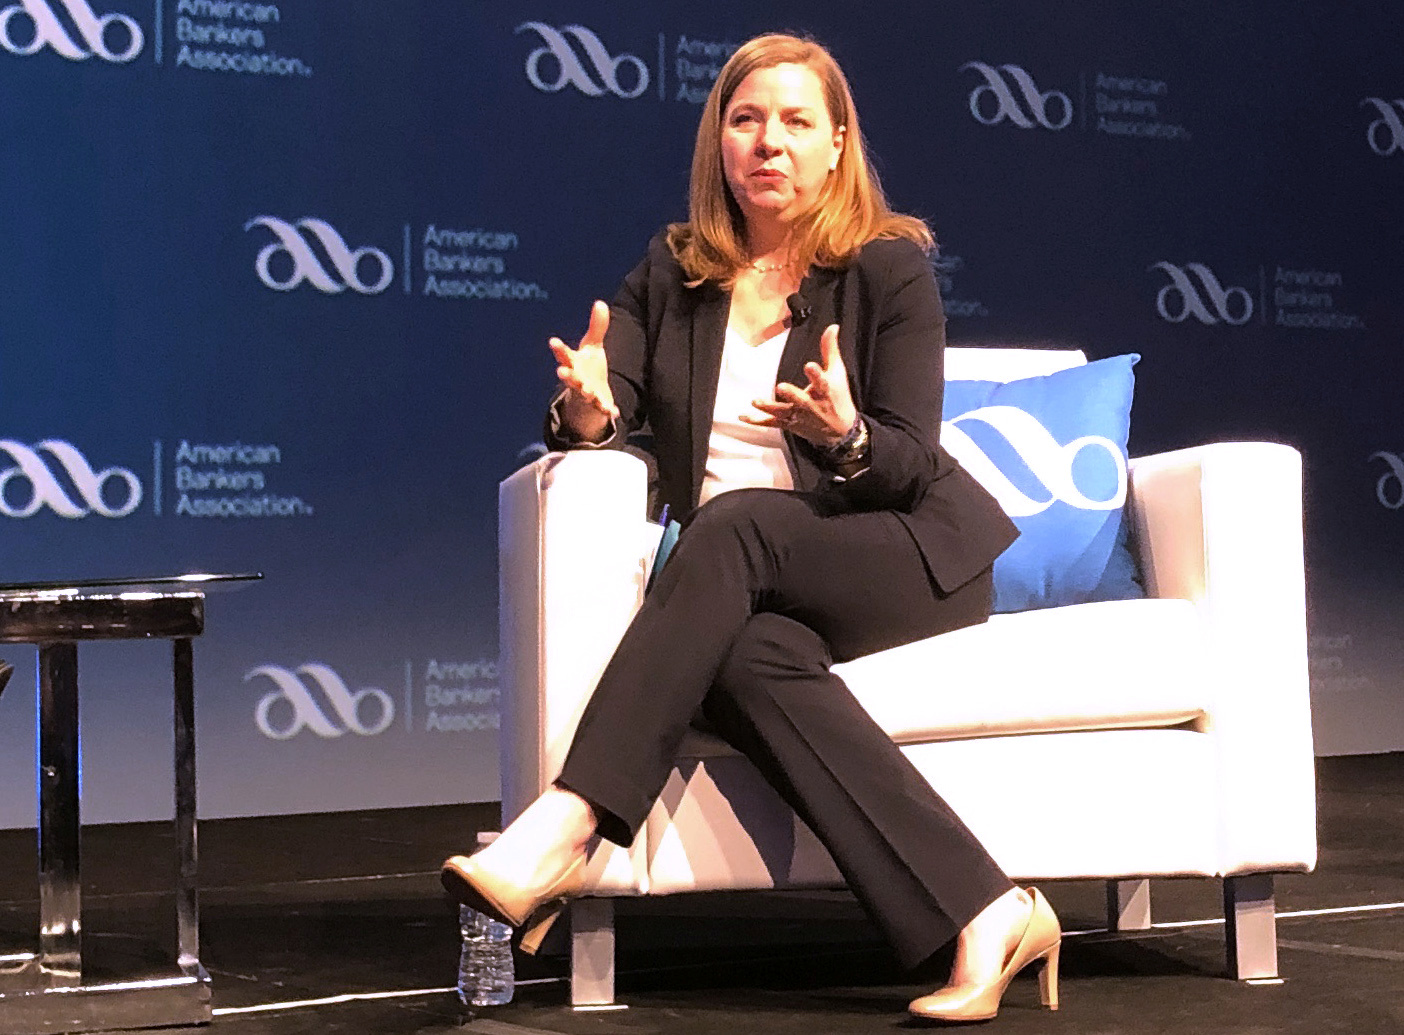 Federal Reserve Governor Michelle Bowman gives her first public remarks as a Fed policymaker at an American Bankers Association conference in San Diego